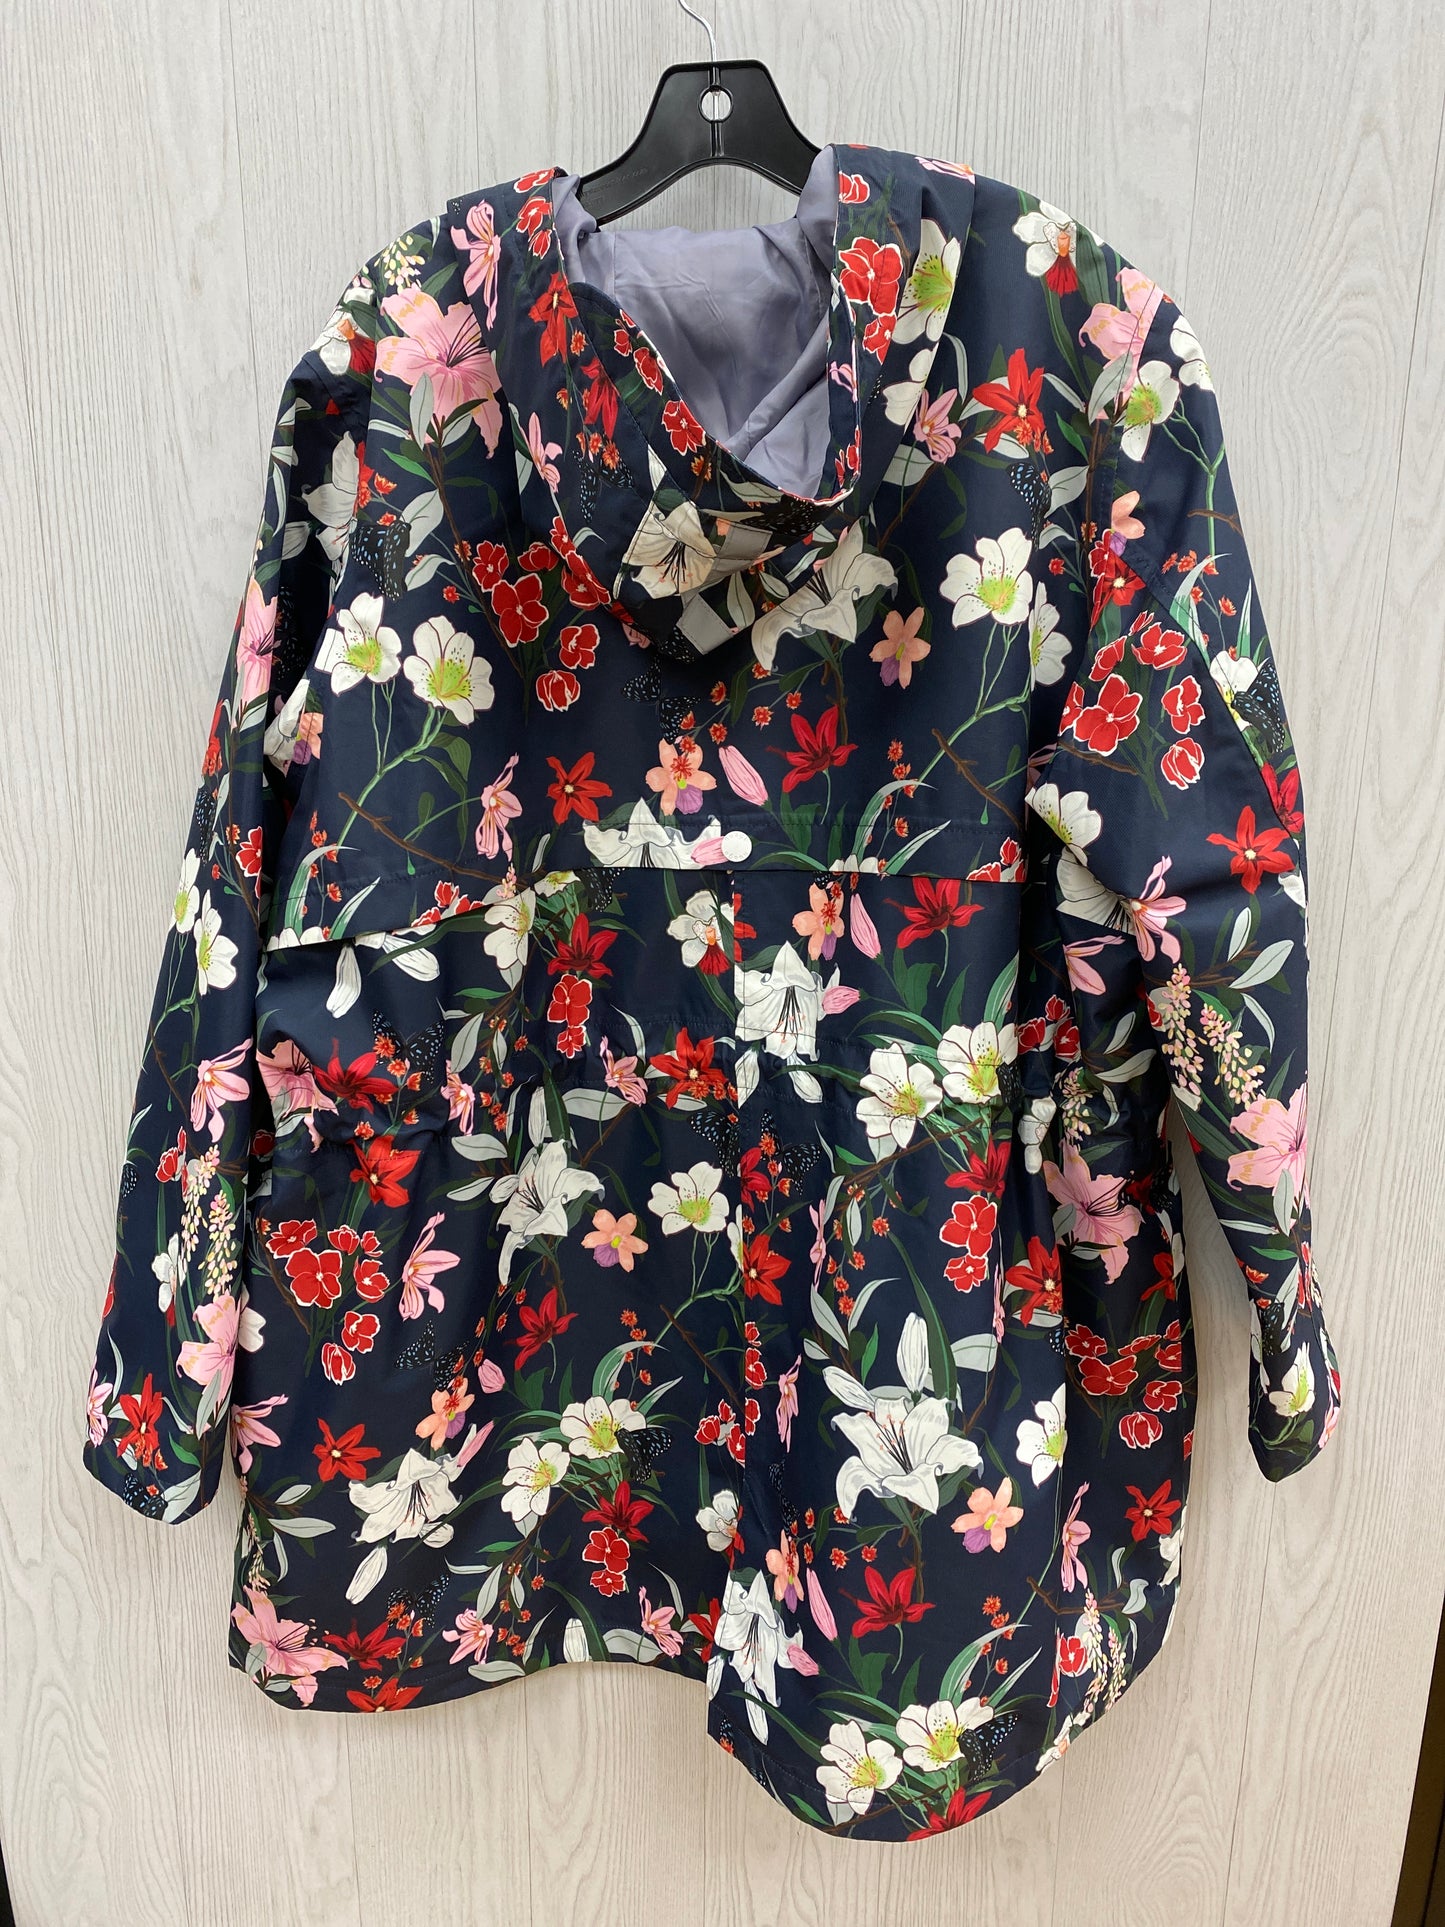 Coat Raincoat By Clothes Mentor  Size: 2x